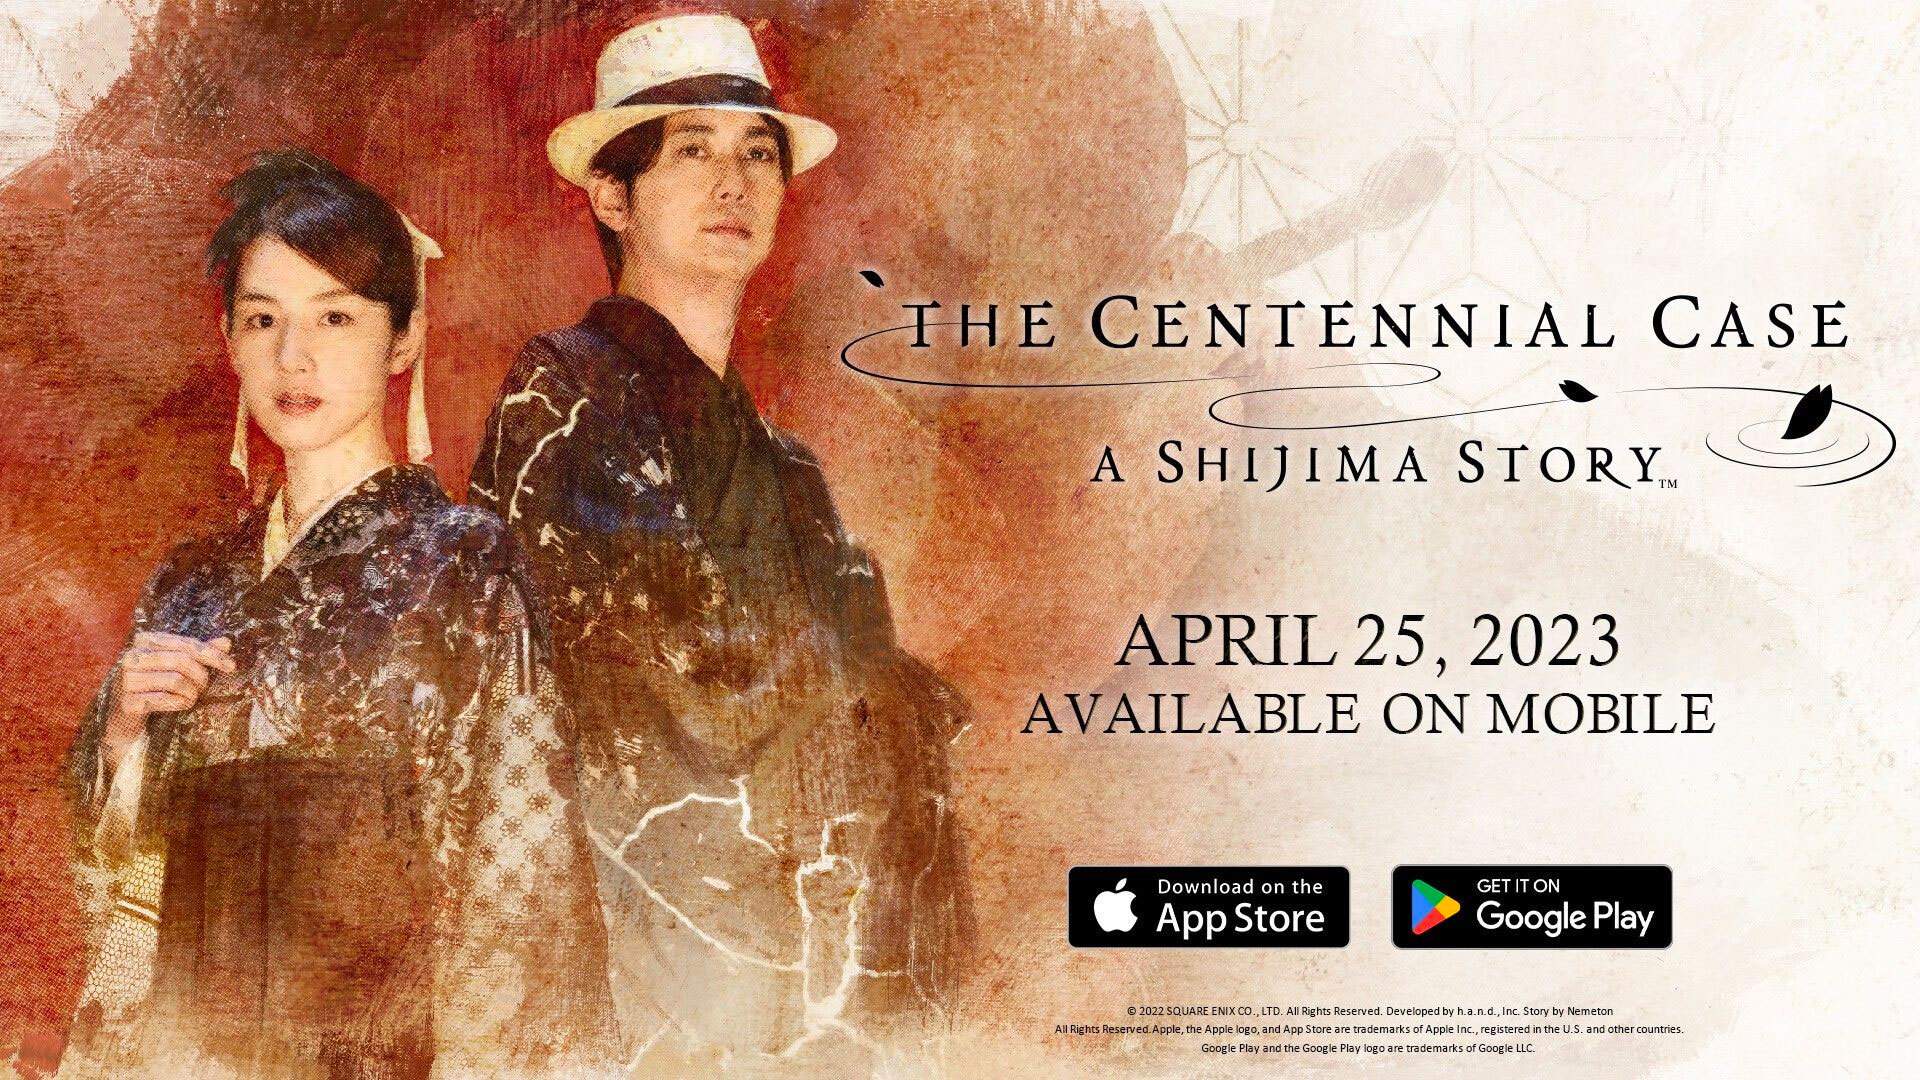 The Centennial Case: A Shijima Story available on mobile